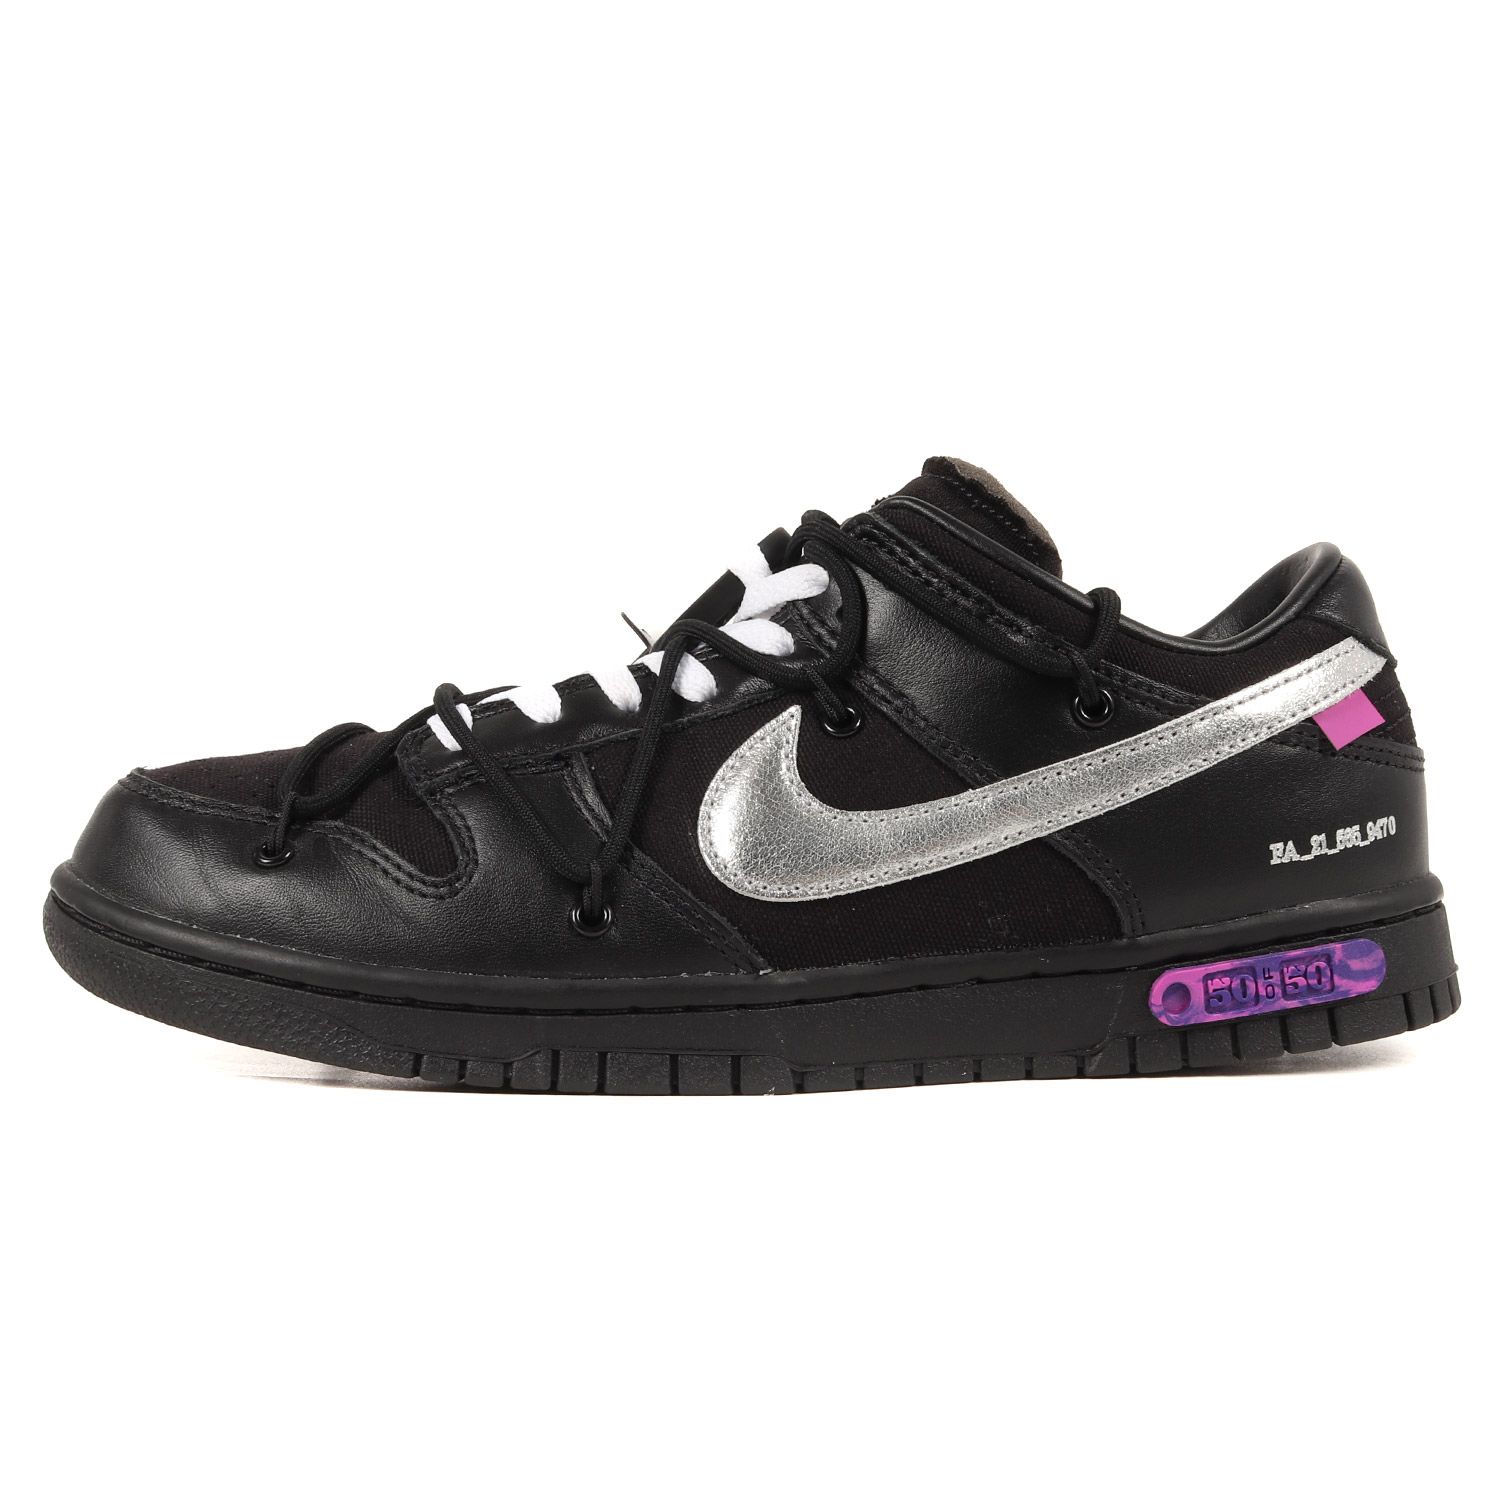 OFF-WHITE オフホワイト NIKE DUNK LOW The 50 / 1 OF 50 No.50